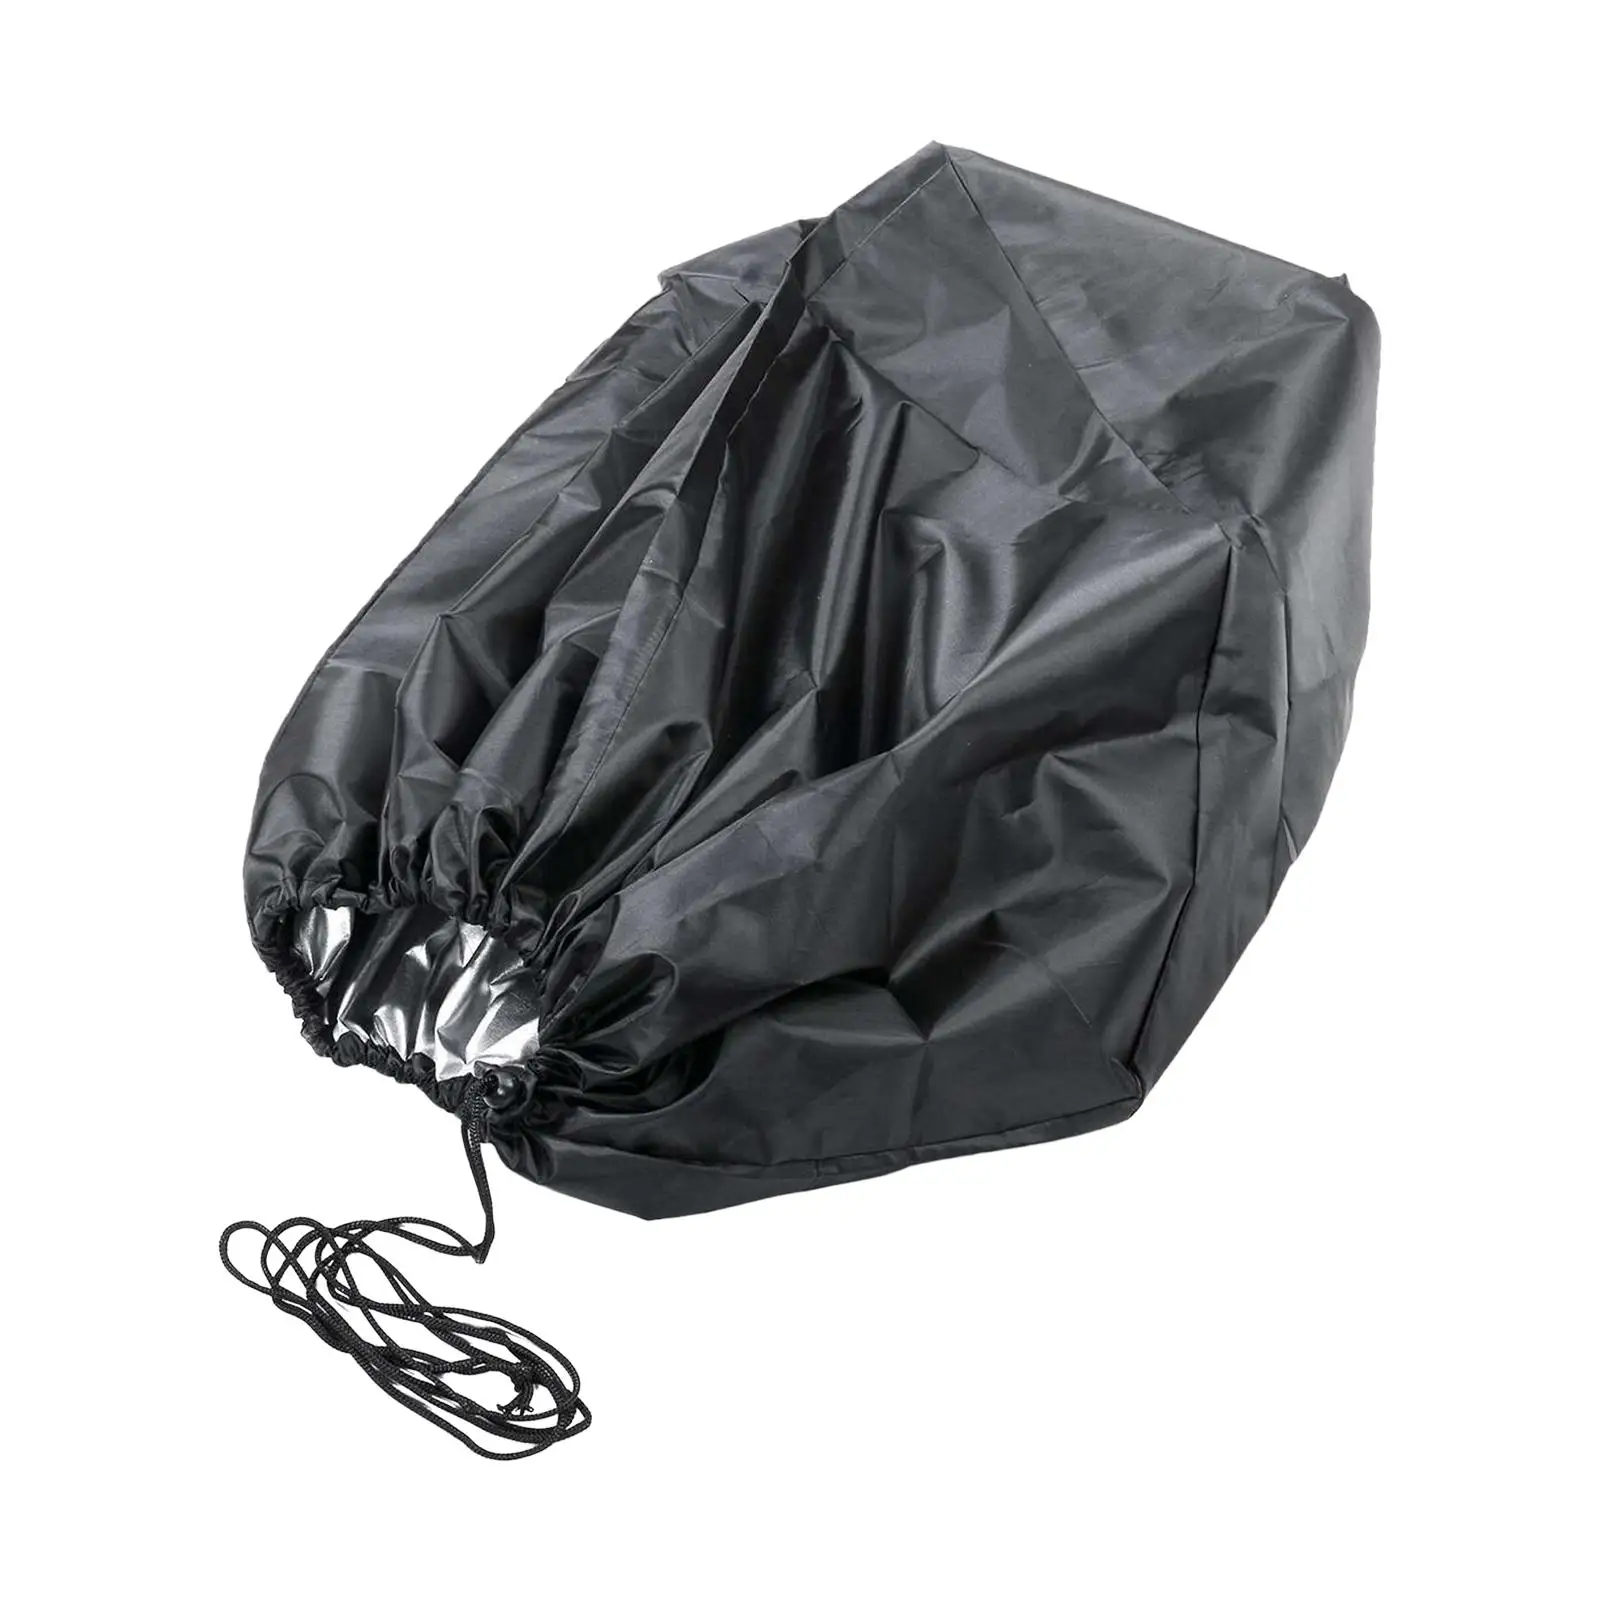 Boat Chair Cover Helmsman Chair Protective Cover for Yacht Ship Fishing